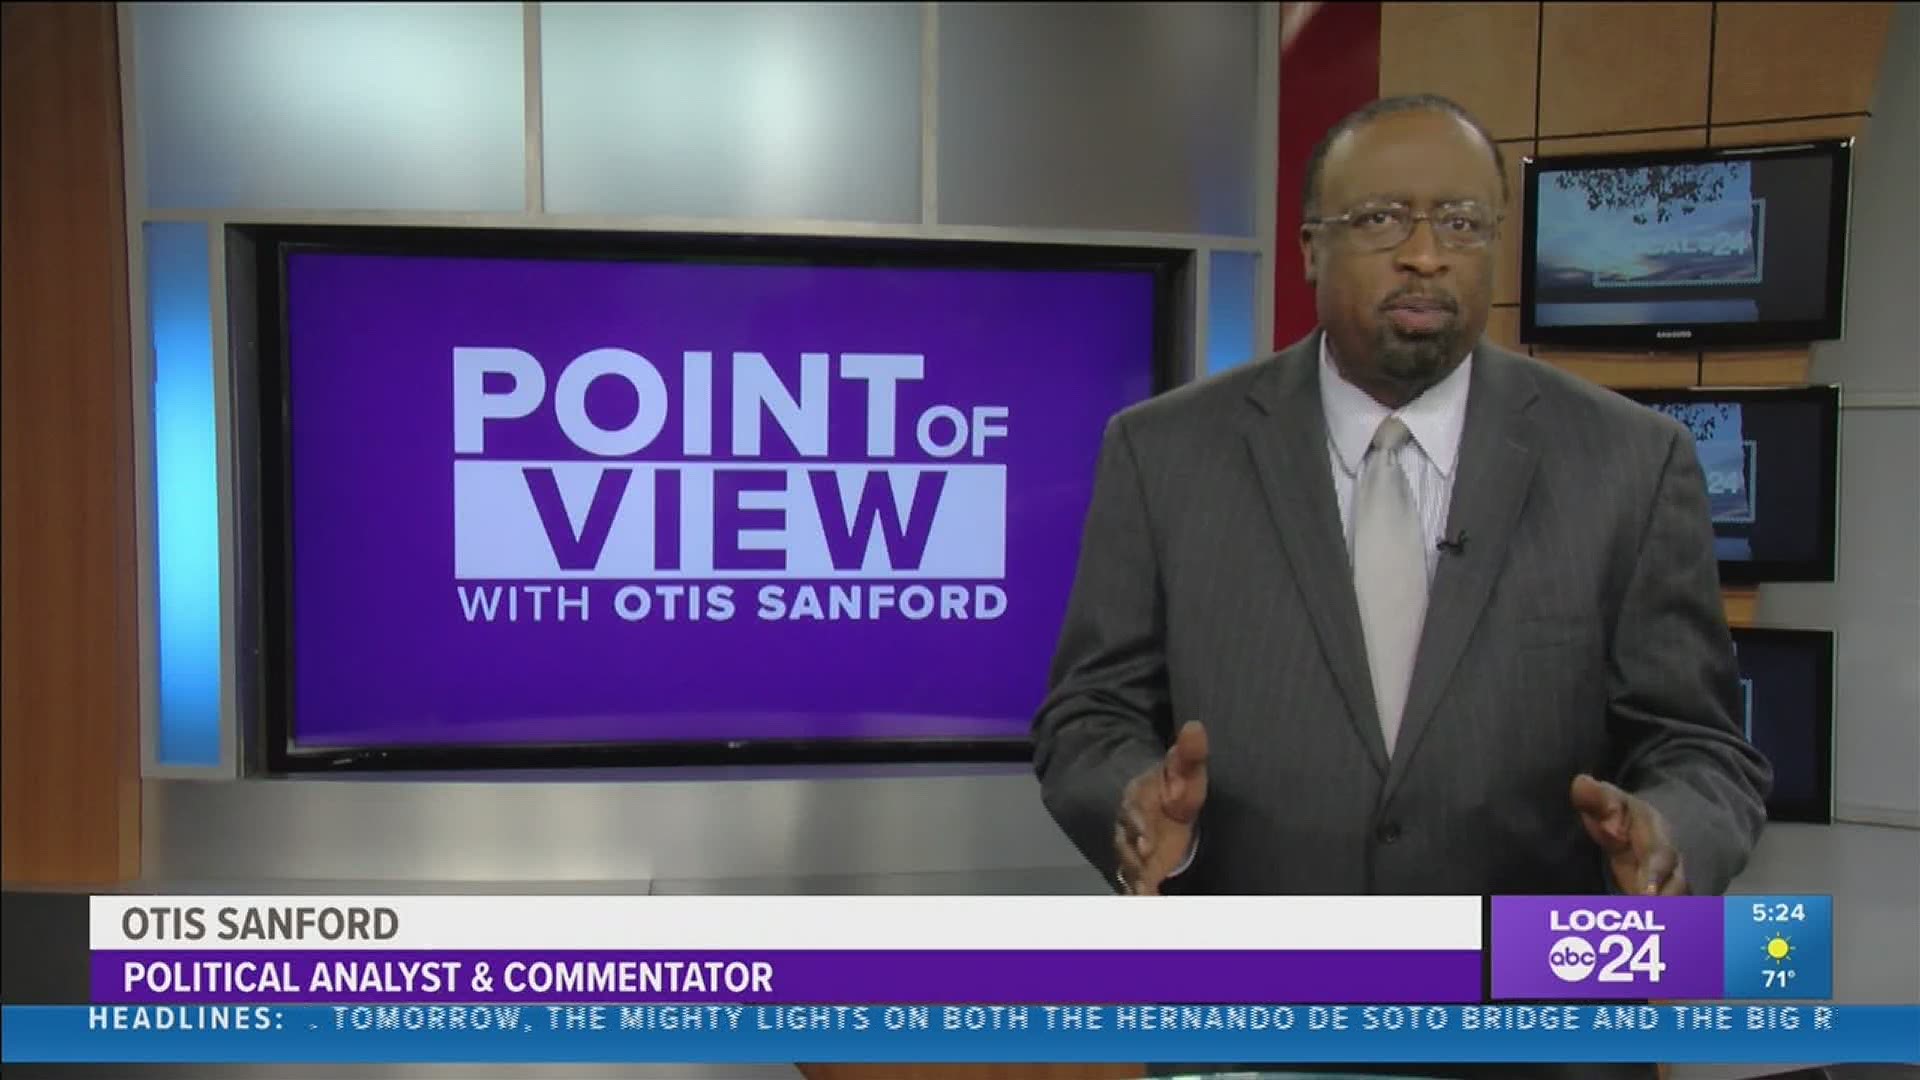 Local 24 News political analyst and commentator Otis Sanford shares his point of view on a Tennessee bill that would allow people to carry guns without permits.